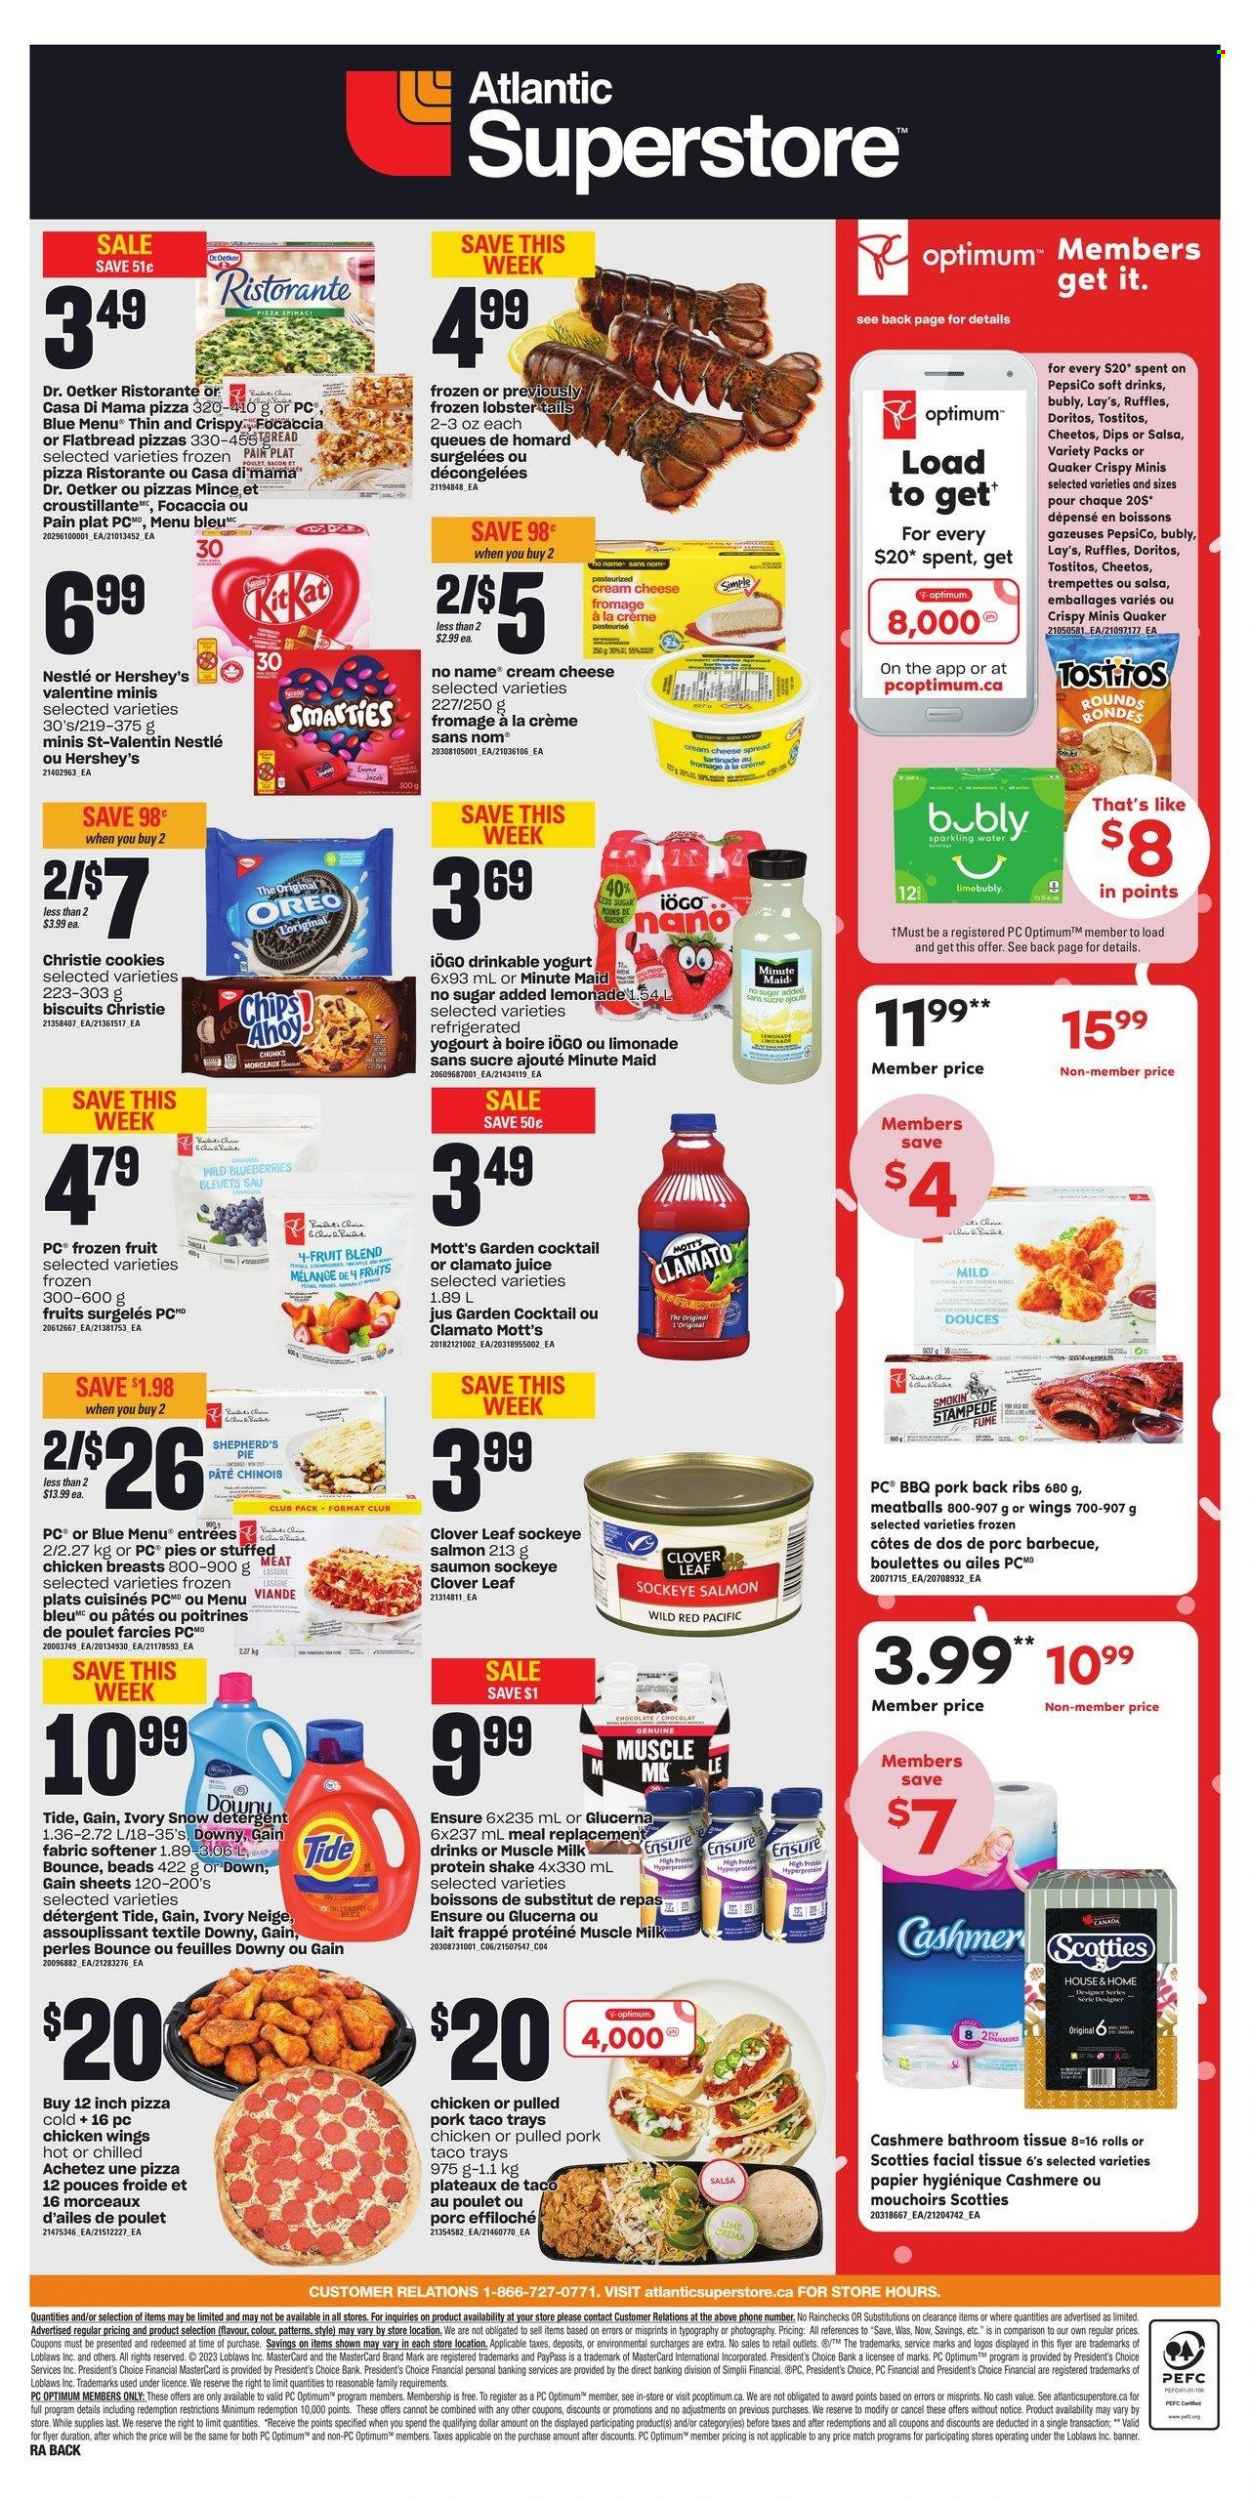 thumbnail - Atlantic Superstore Flyer - February 09, 2023 - February 15, 2023 - Sales products - pie, focaccia, flatbread, blueberries, Mott's, lobster, salmon, lobster tail, No Name, pizza, meatballs, Quaker, pulled pork, stuffed chicken, cheese spread, Dr. Oetker, yoghurt, Clover, protein drink, shake, muscle milk, Hershey's, chicken wings, cookies, biscuit, Doritos, Cheetos, Lay’s, Ruffles, Tostitos, salsa, lemonade, juice, Clamato, soft drink, fruit punch, sparkling water, ribs, pork meat, pork ribs, pork back ribs, bath tissue, Gain, Tide, fabric softener, Bounce, Optimum, Glucerna, detergent, Nestlé, Oreo, Smarties. Page 2.